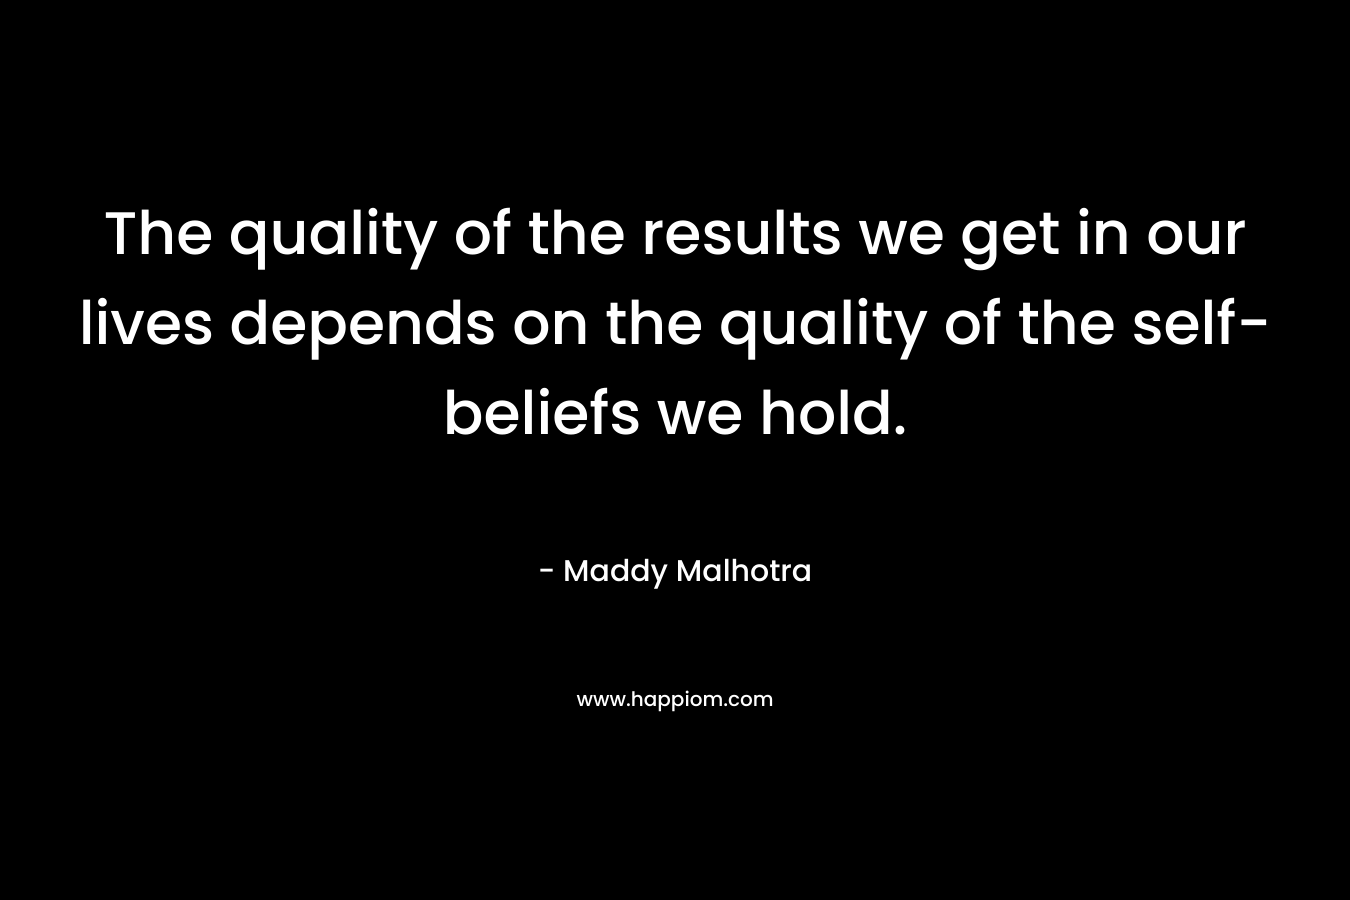 The quality of the results we get in our lives depends on the quality of the self-beliefs we hold.